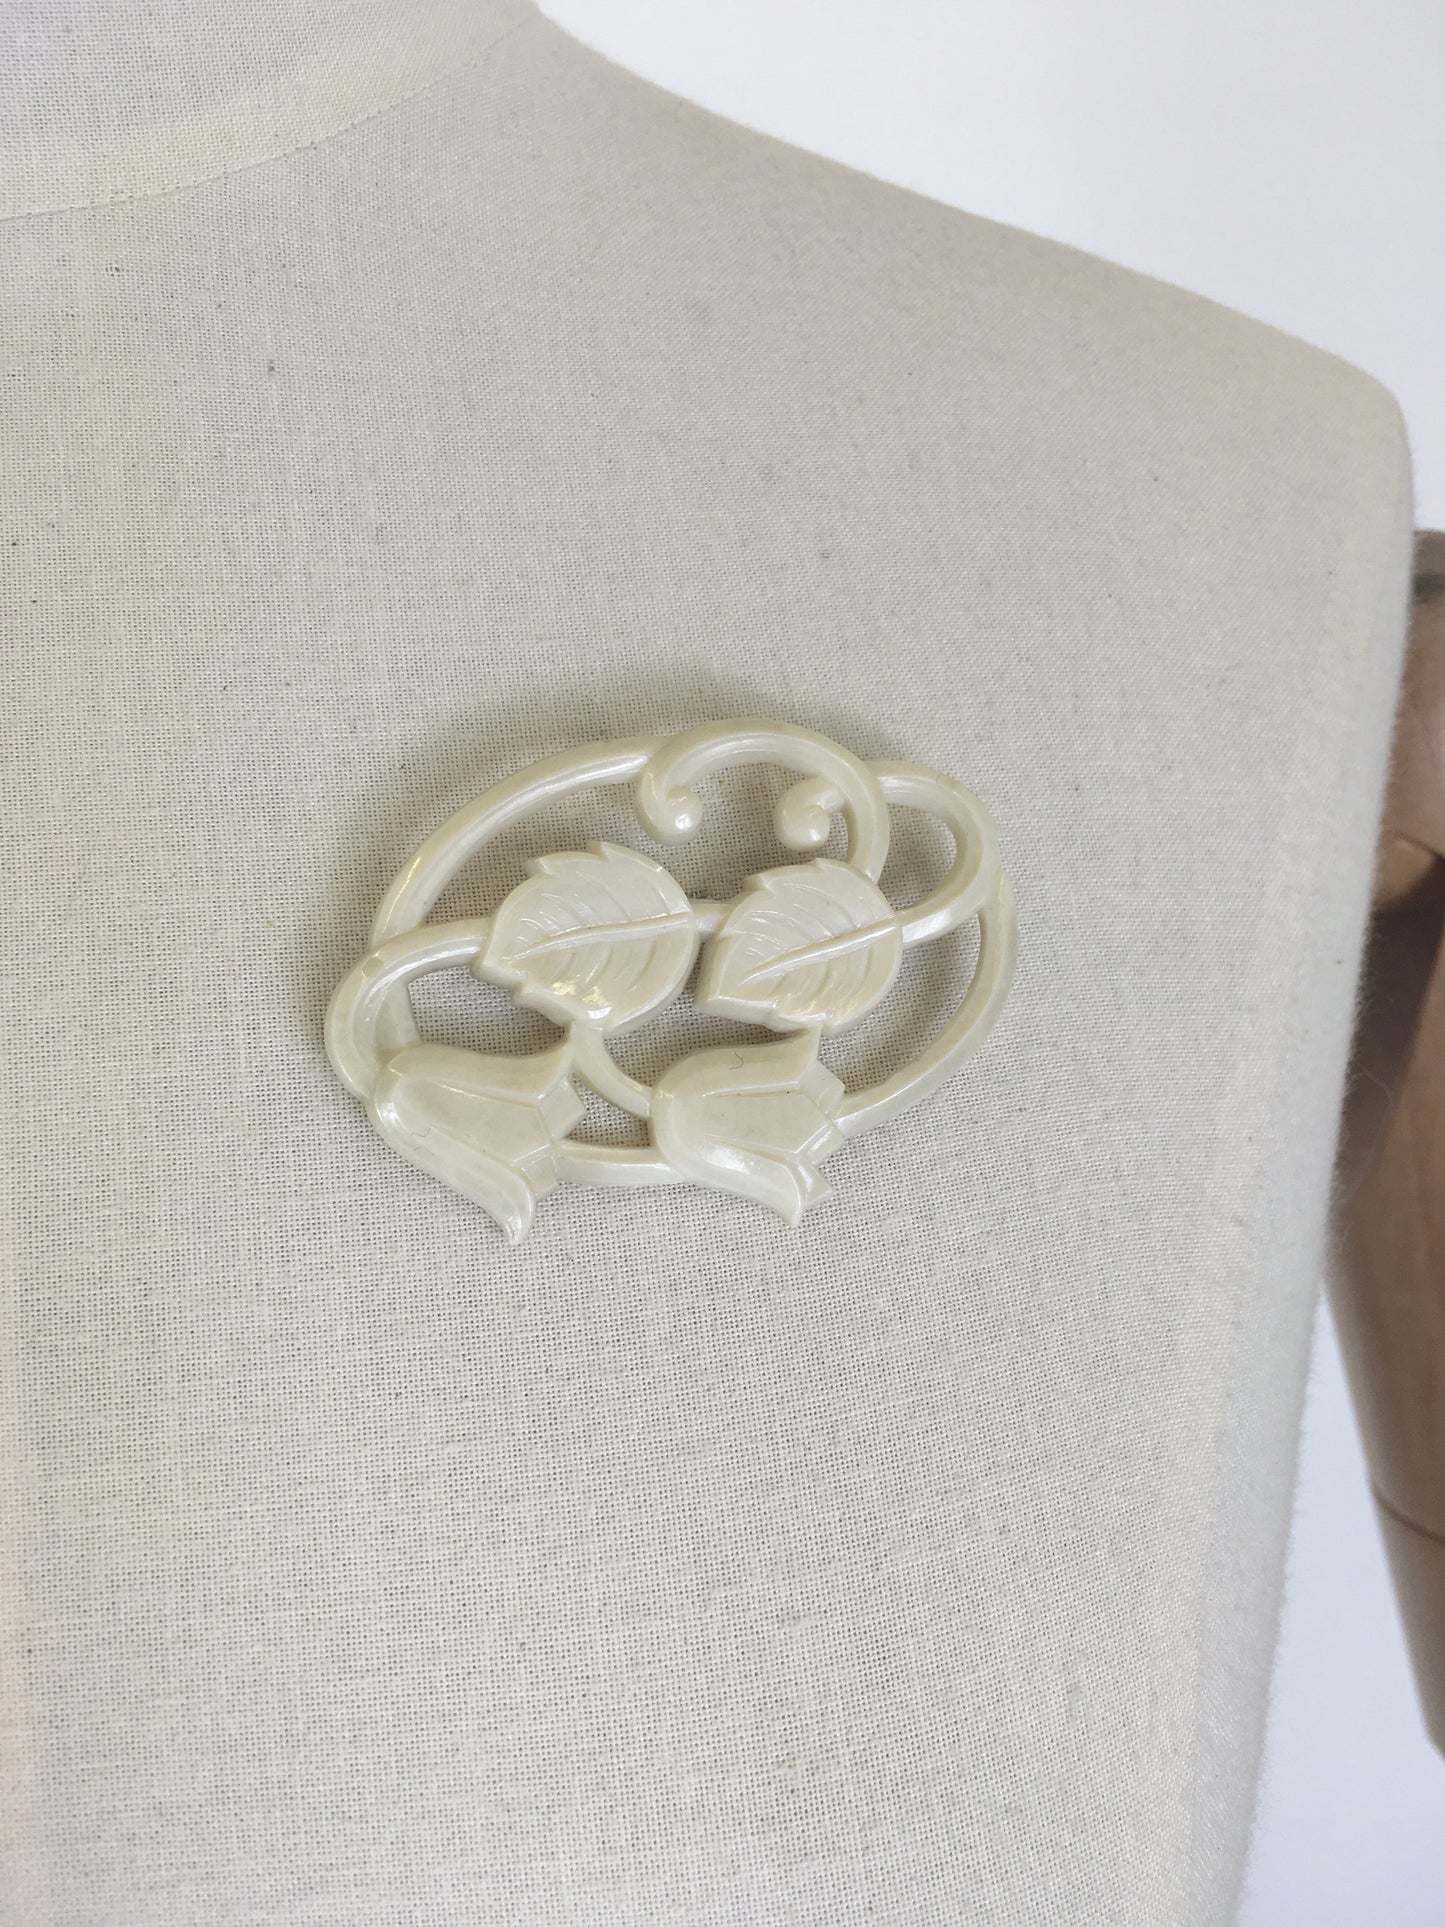 Original 1940’s Early Plastic Brooch - Adorned with Flora and Leaves in Old Cream